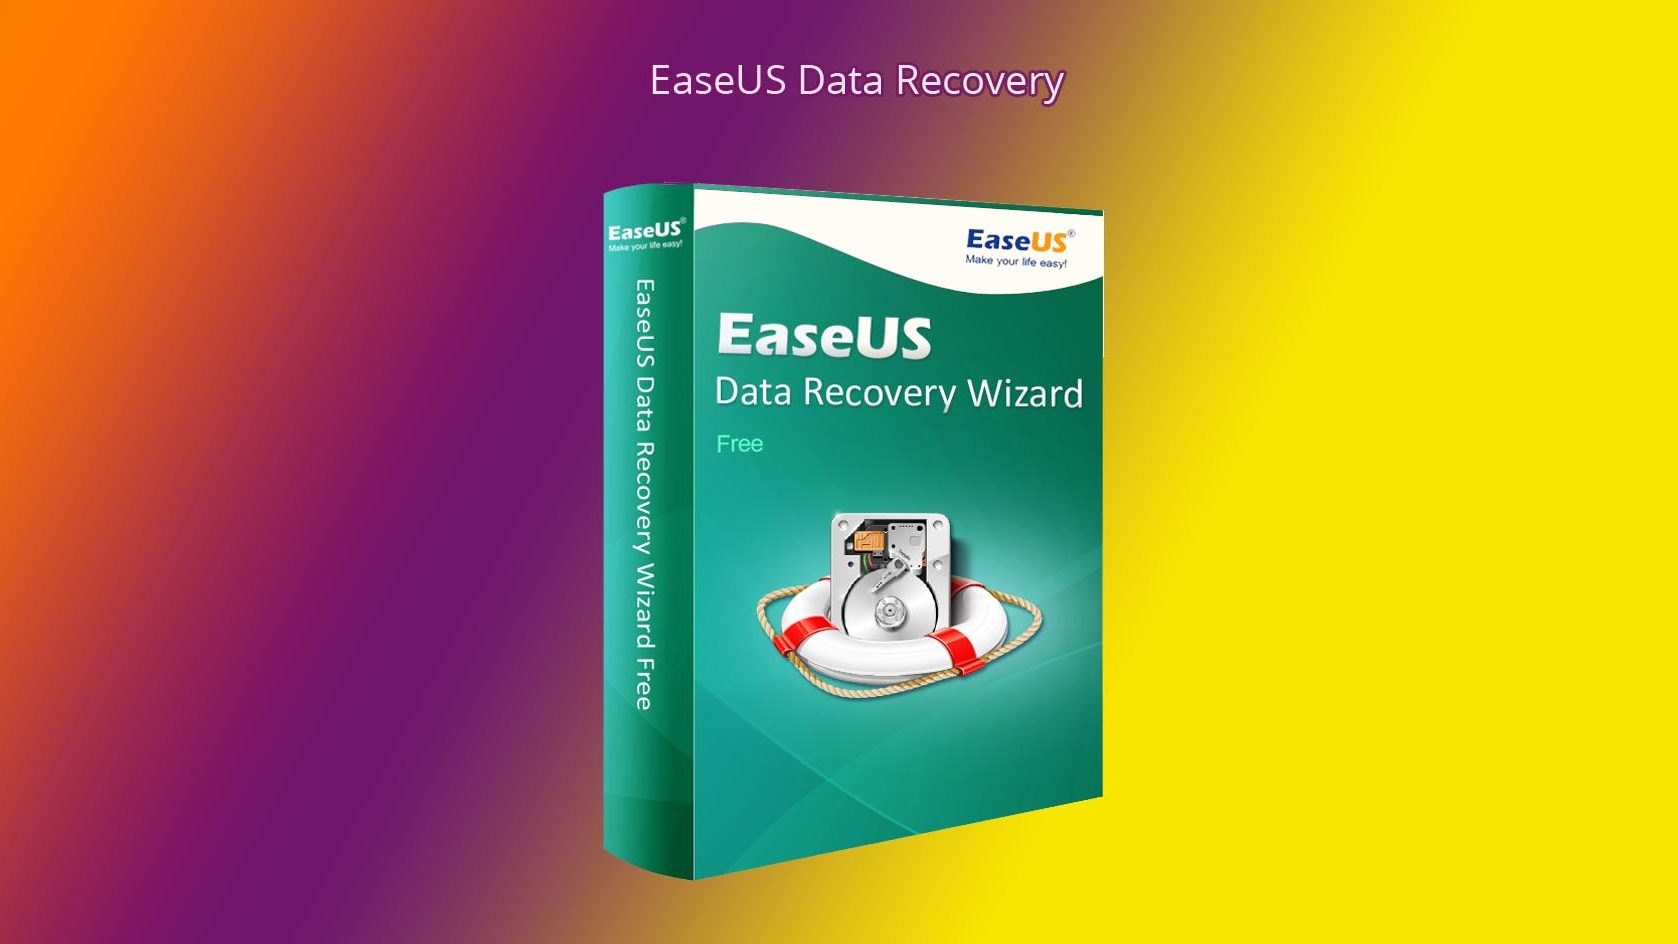 Granskning: EaseUS Data Recovery Wizard Free